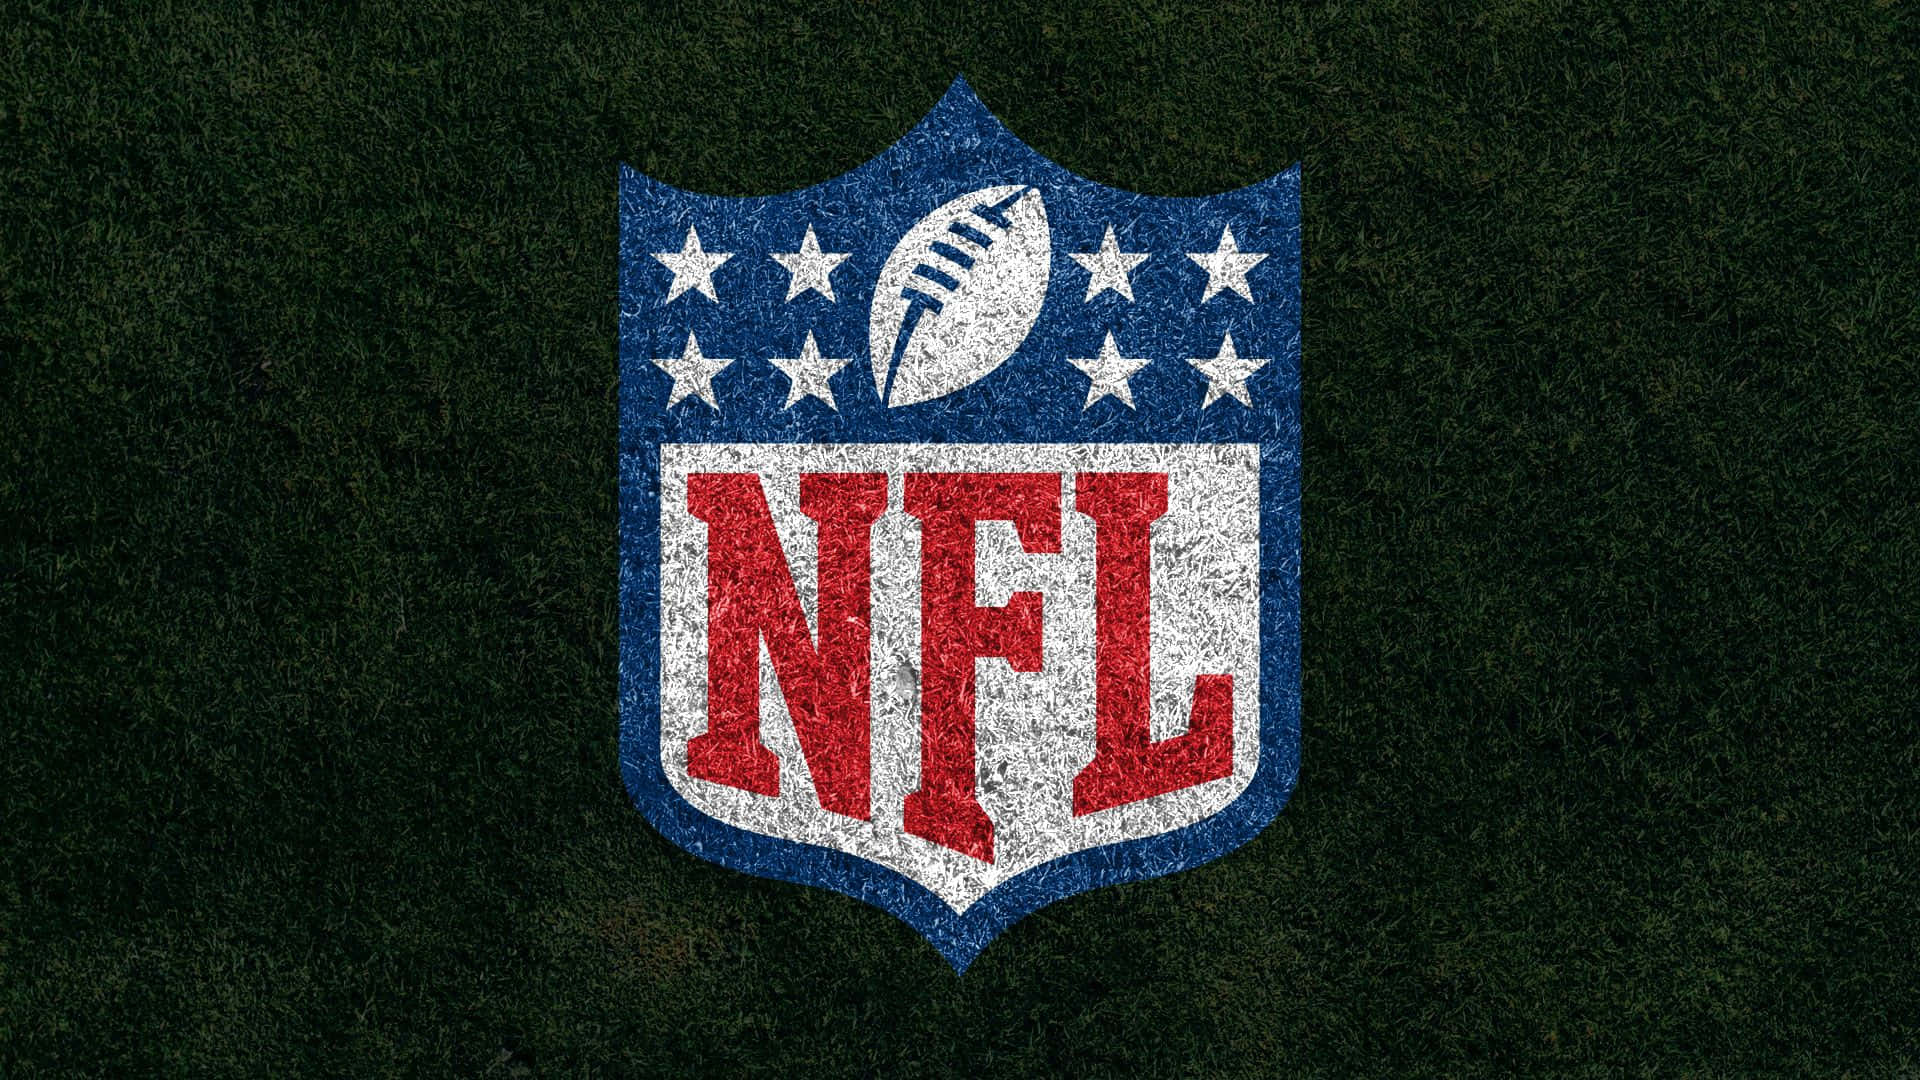 Nfl Logo On Grass With Stars